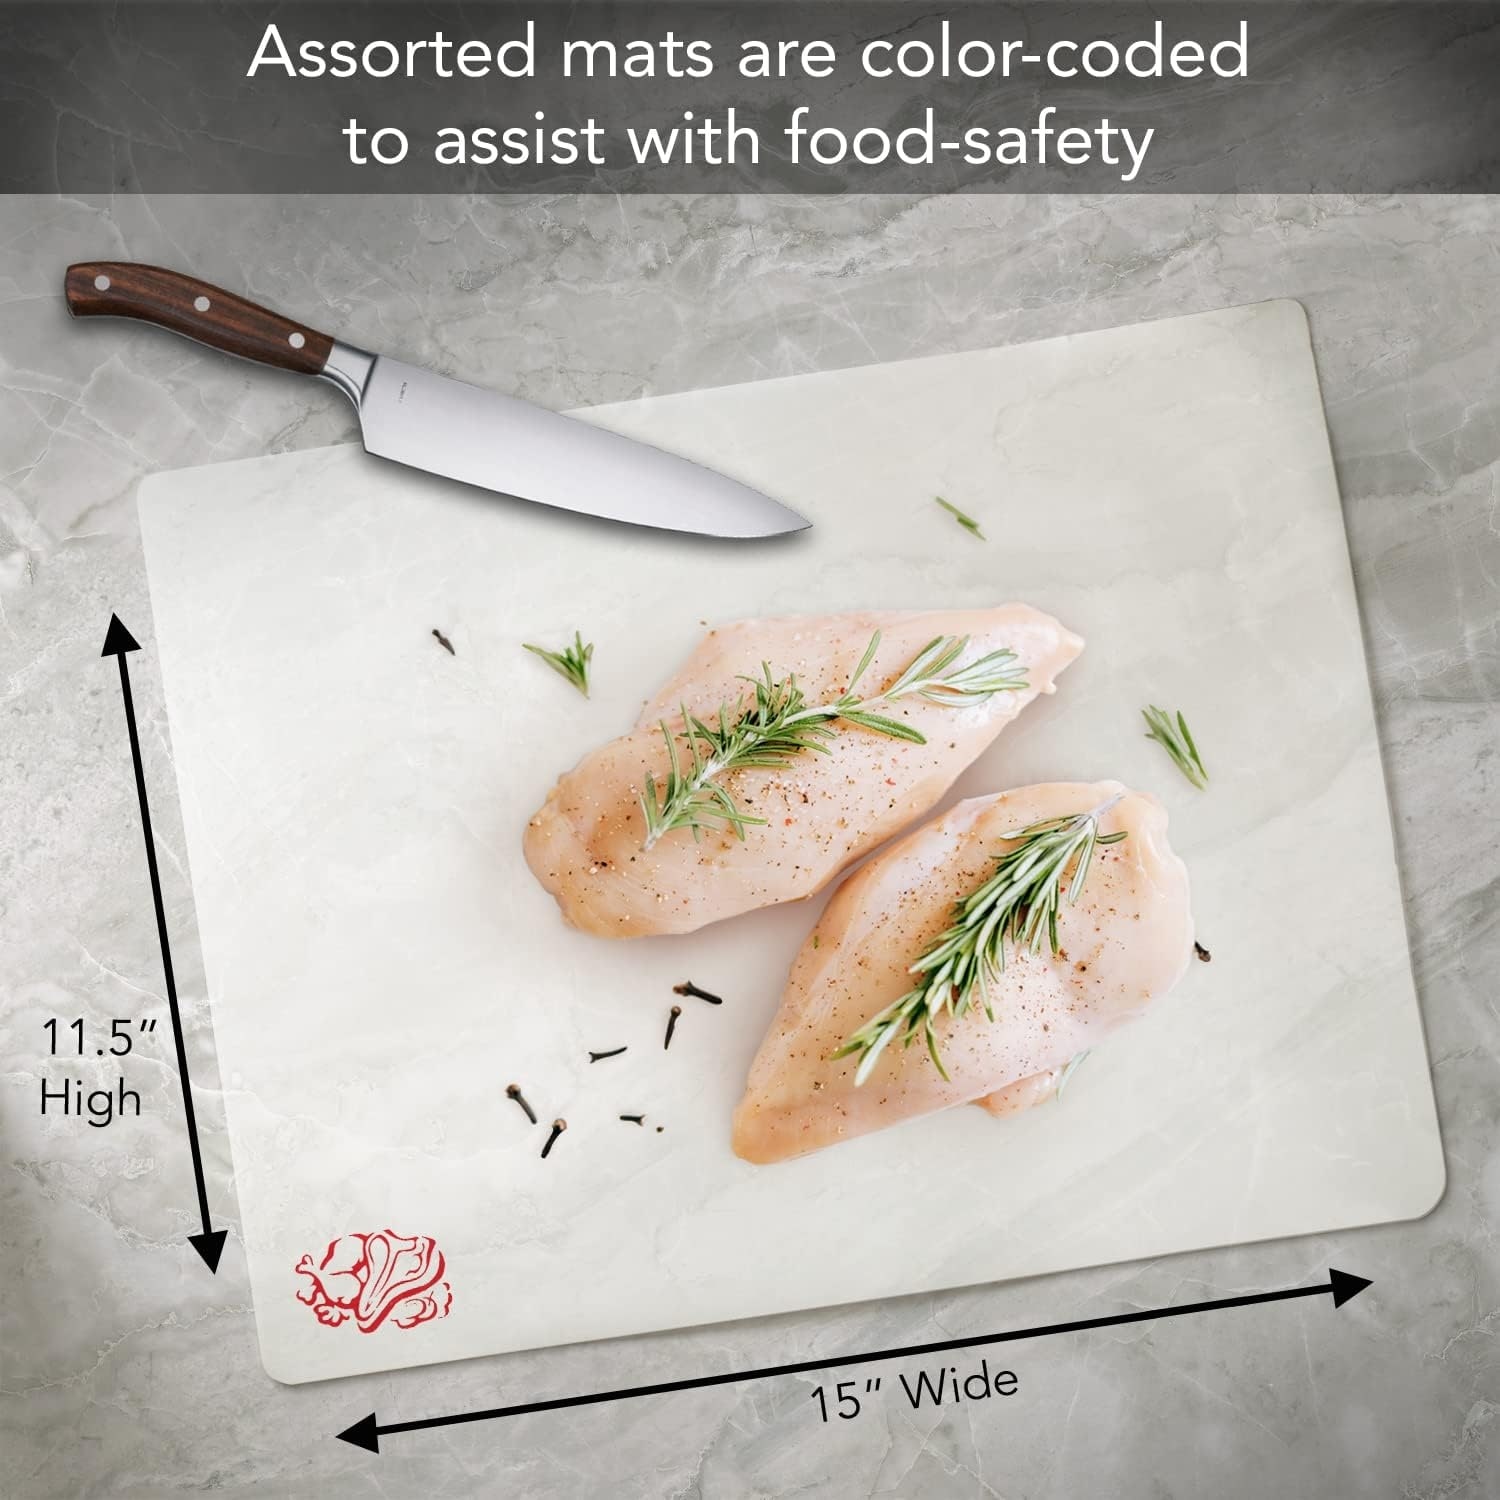 https://ak1.ostkcdn.com/images/products/is/images/direct/a2e26ae3fbeec3f4c3d615de528f41ee2d23430c/Flexible-Cutting-Board-Mats-Set-of-3%2C-Clear-Frosted-with-Food-Icons%2C-Made-in-the-USA-of-BPA-Free-Food-Grade-Plastic%2C-11.5%E2%80%9D-x-15%E2%80%9D.jpg